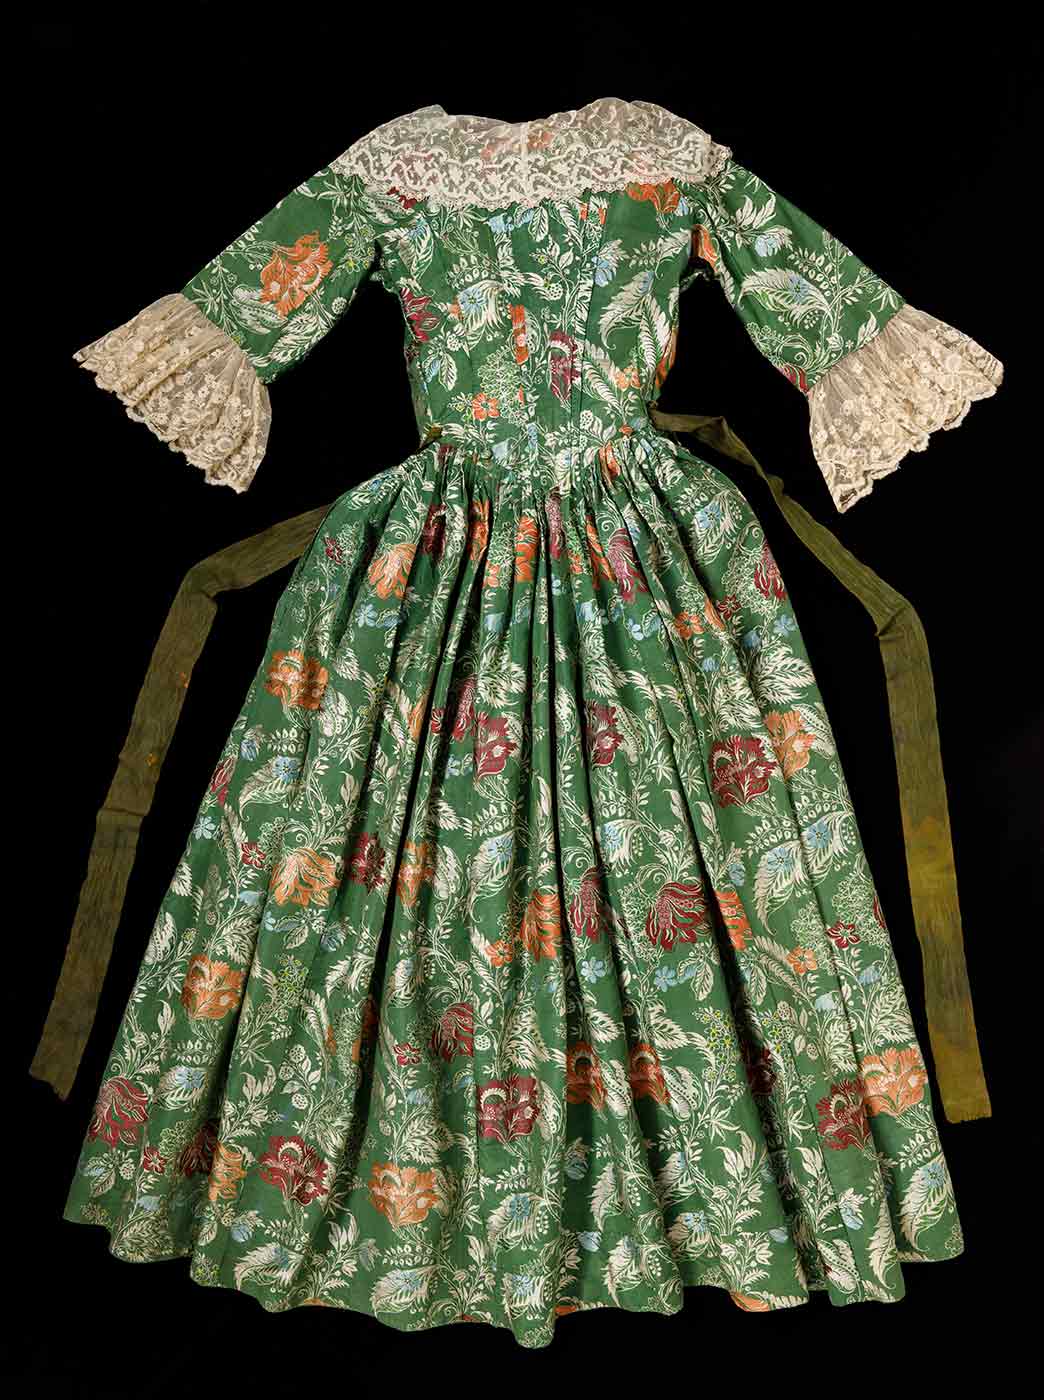 The back of a green and floral dress with lace trim on the sleeves and collar with a long green sash like belt stitched at the waist. - click to view larger image